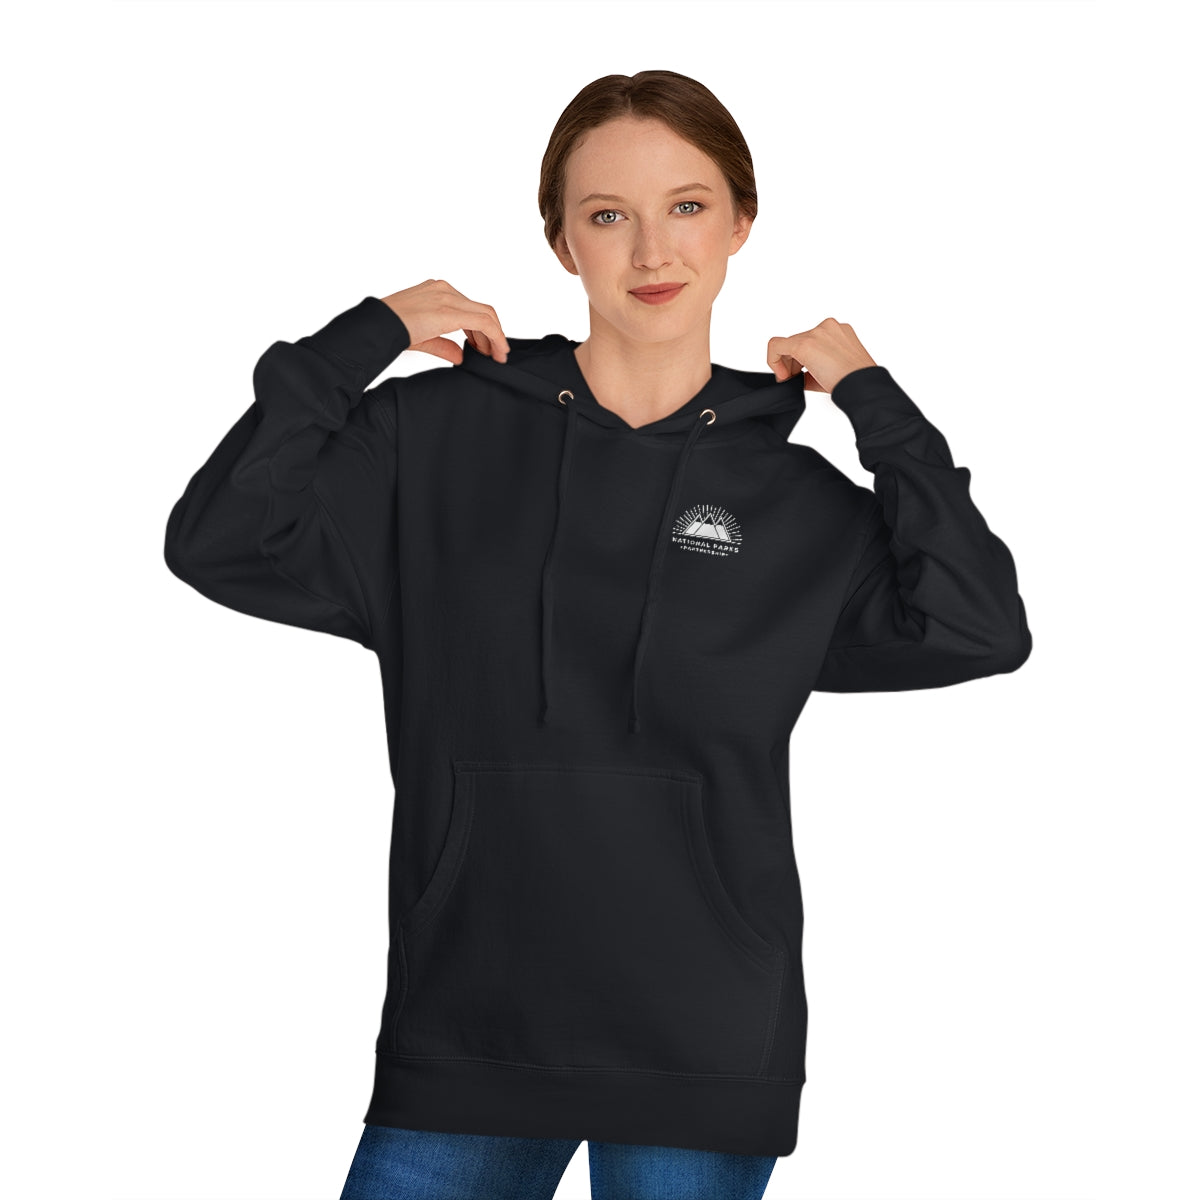 North Cascades National Park Hoodie - Lines